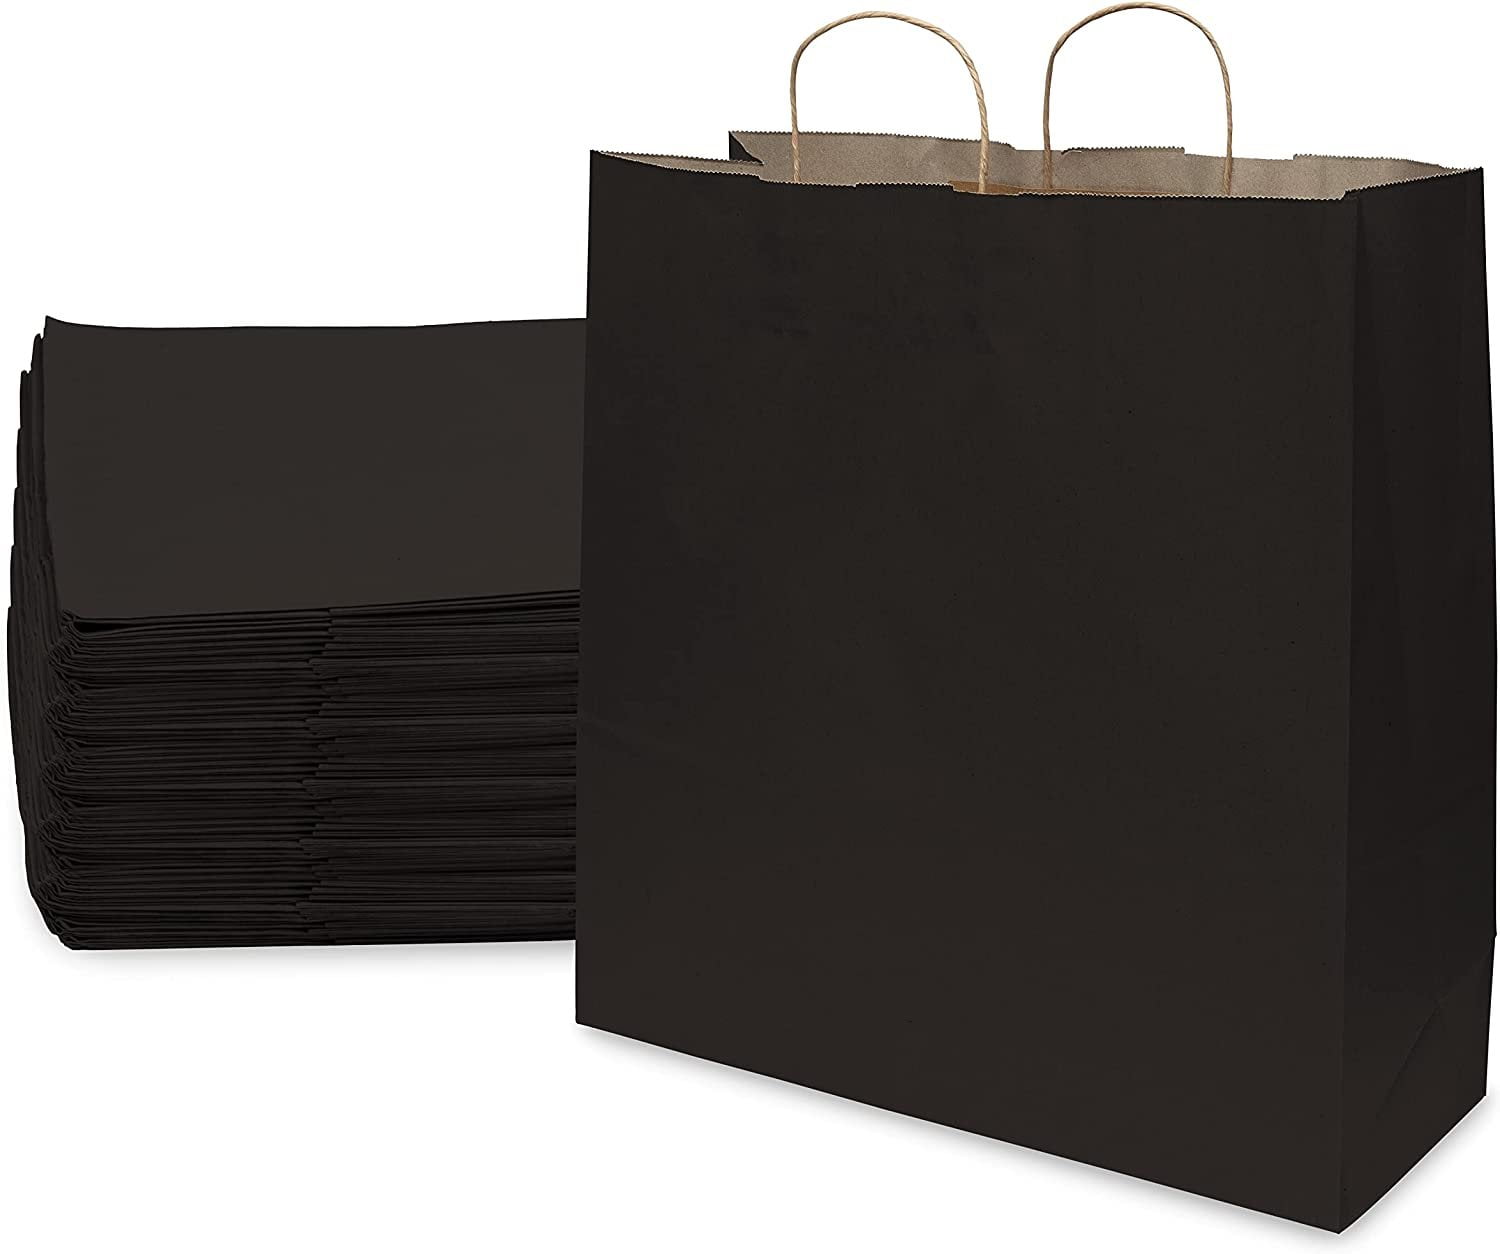 SHIPKEY 4 Pack Black Gift Bags with Tissue Paper, 12.5x4.7x11 Inches,  Reusable Gift Bags, Large Gift Bags, Reusable Grocery Bags for Bridesmaids,  Men and Women (32x12x28 cm) 